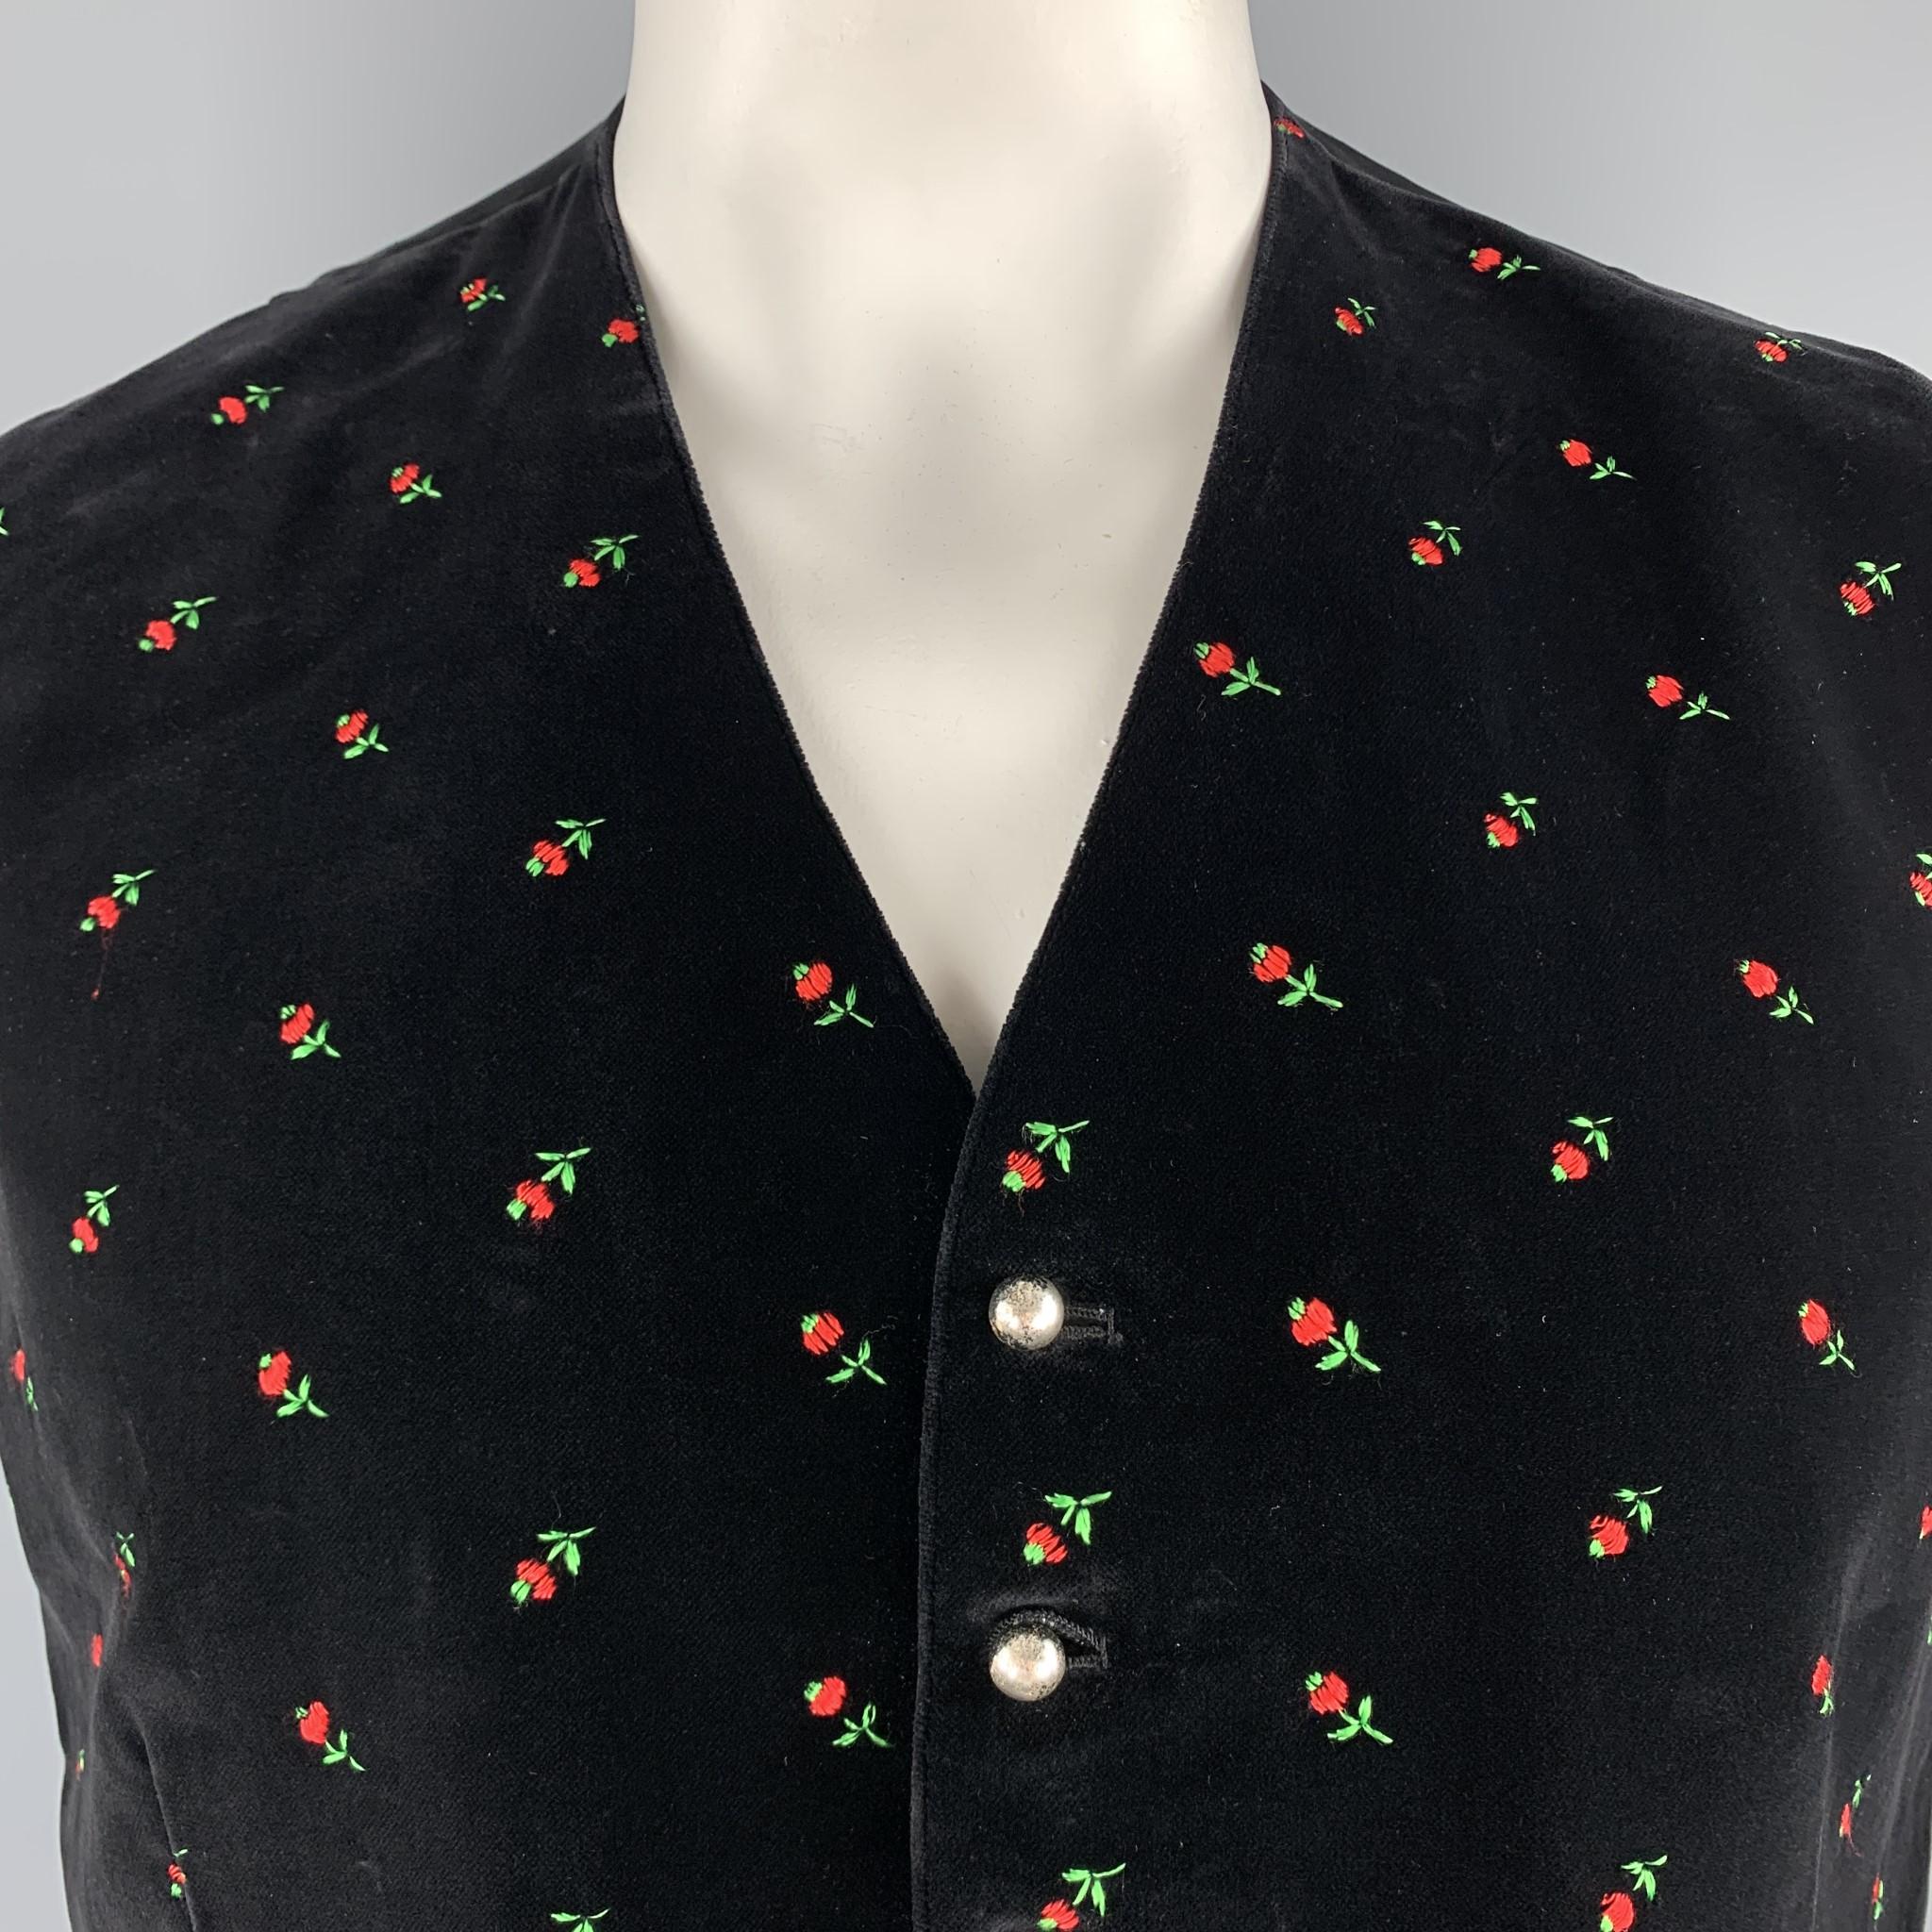 ORIGINAL-LANZ vest comes in black velvet with an all over red and green rosette embroidered pattern, V neck, and antique silver tone metal buttons. Made in Austria.

Excellent Pre-Owned Condition.
Marked: EU 52

Measurements:

Shoulder: 14.5